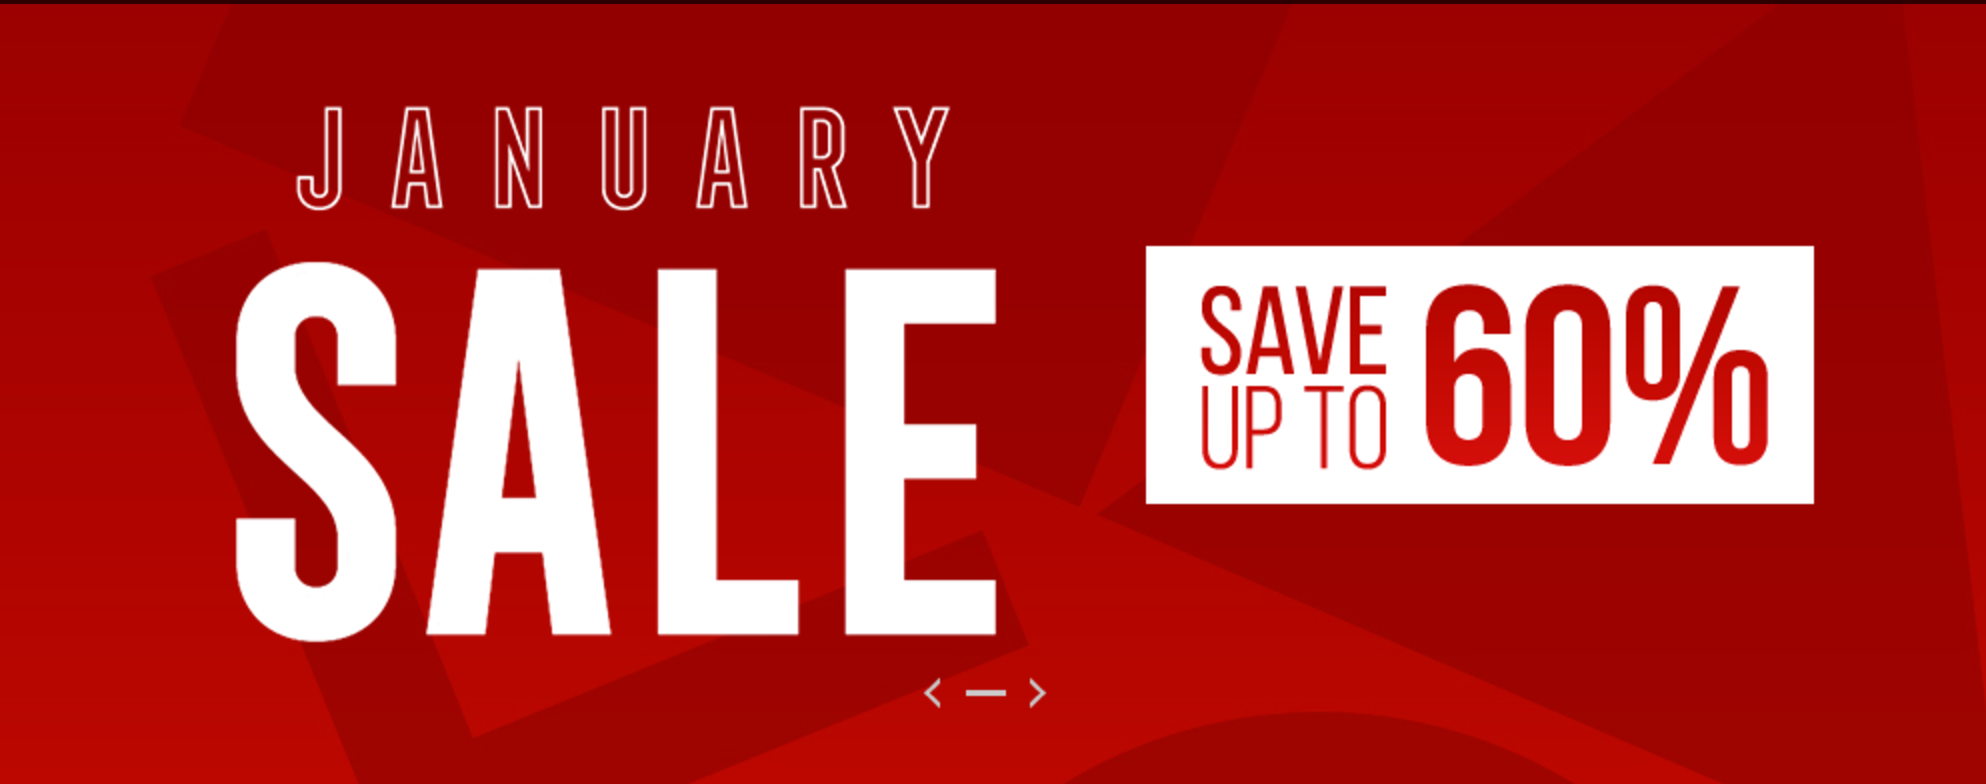 January sale PS Store. December sale. Bargain sale. Sale up to 60. The january sales started and